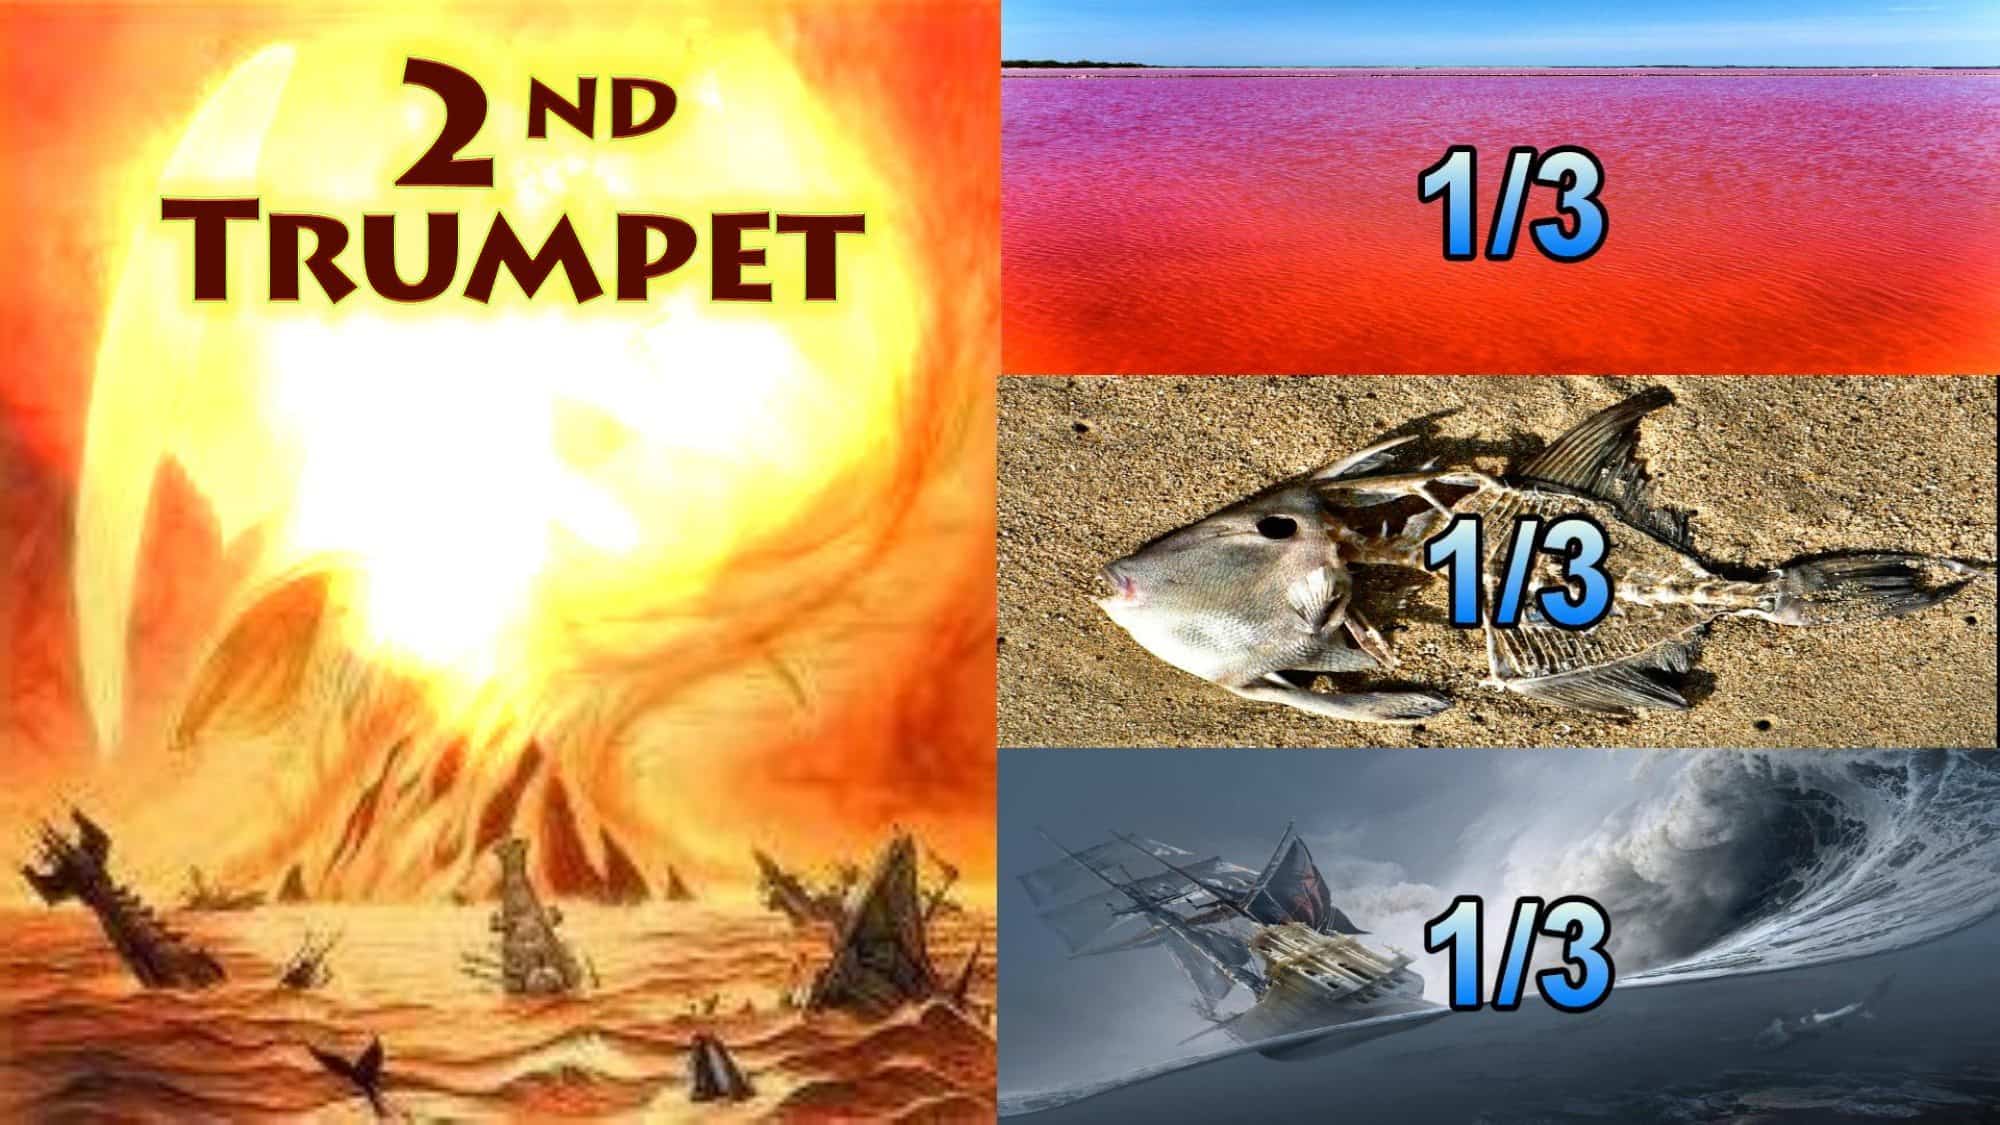 Second Trumpet,Something Like a,great Mountain Burning,Fire,Third Sea Blood,Third Sea Creachers Died,Third Boats Wrecked,destroyed,Seven Trumpets,Book of Revelation,Revelation Chapter 8,Apocalypse